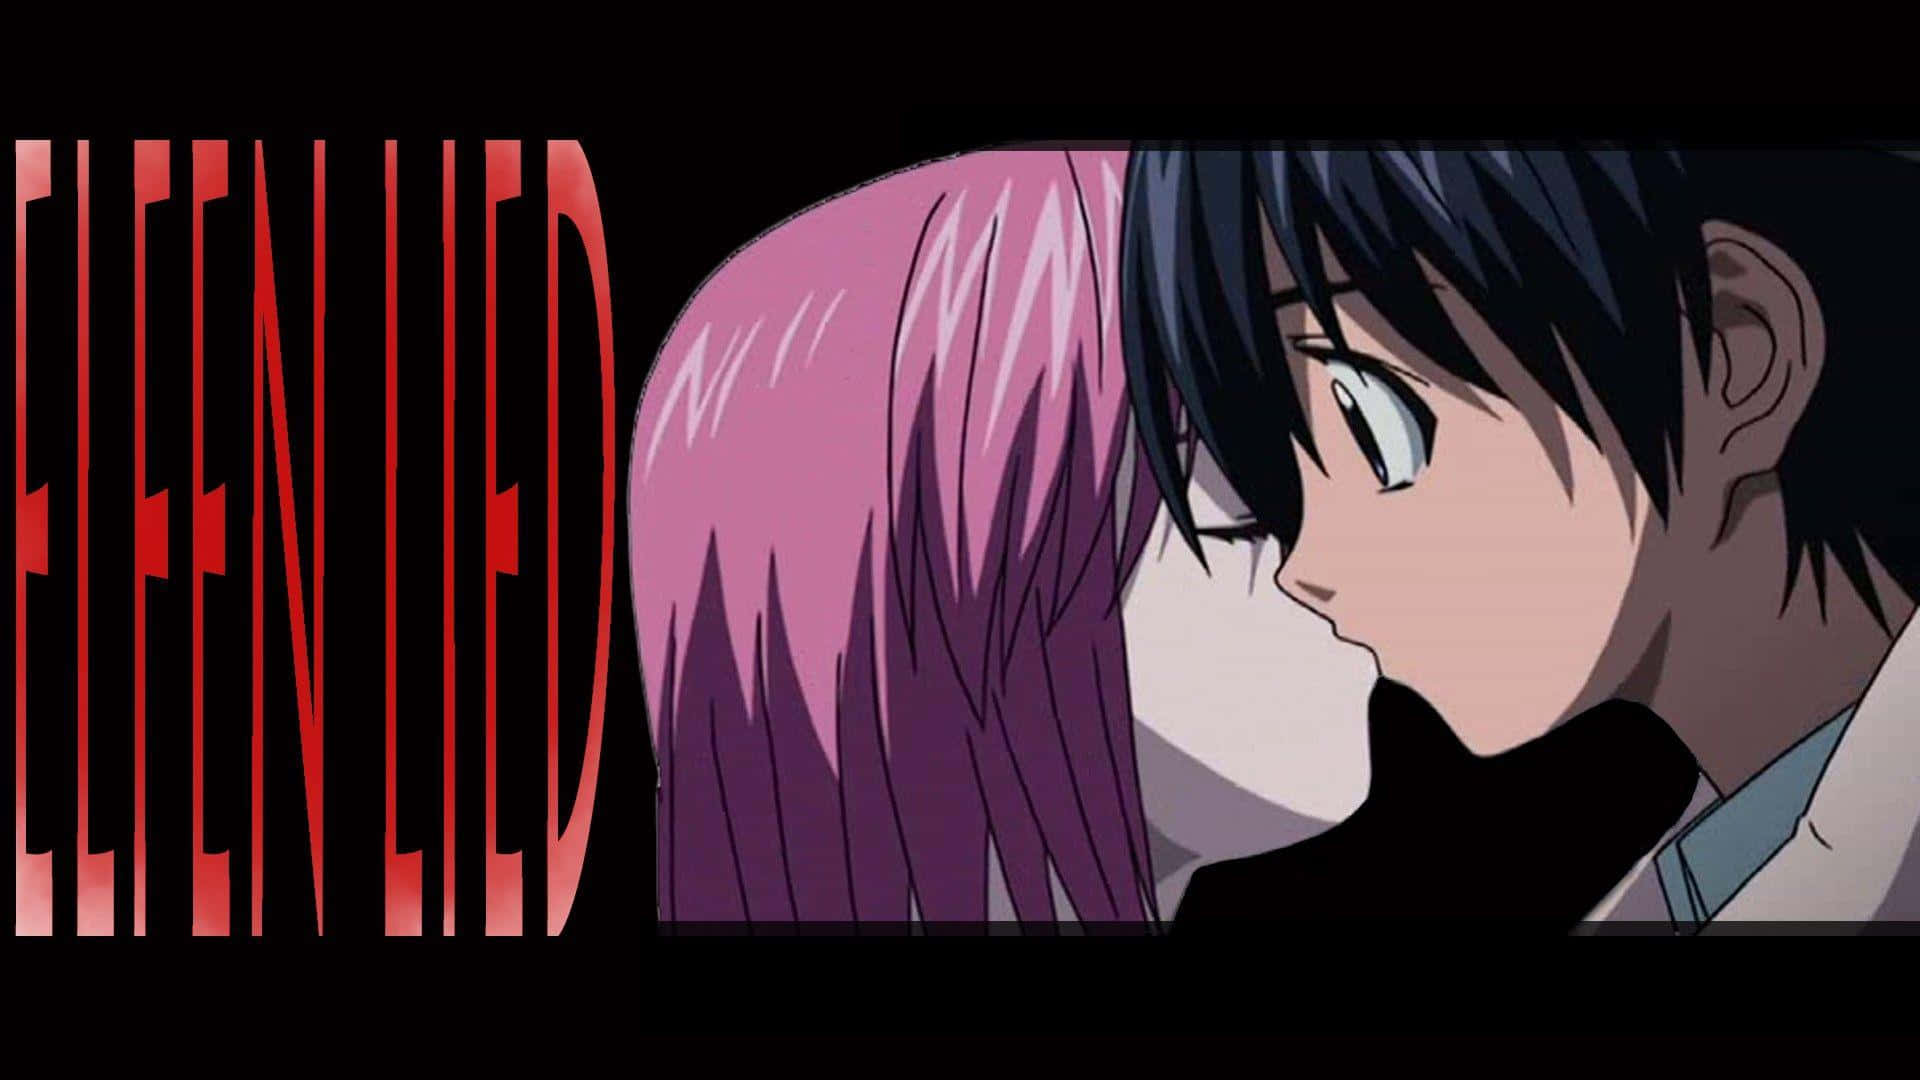 Lucy, the main protagonist of Elfen Lied